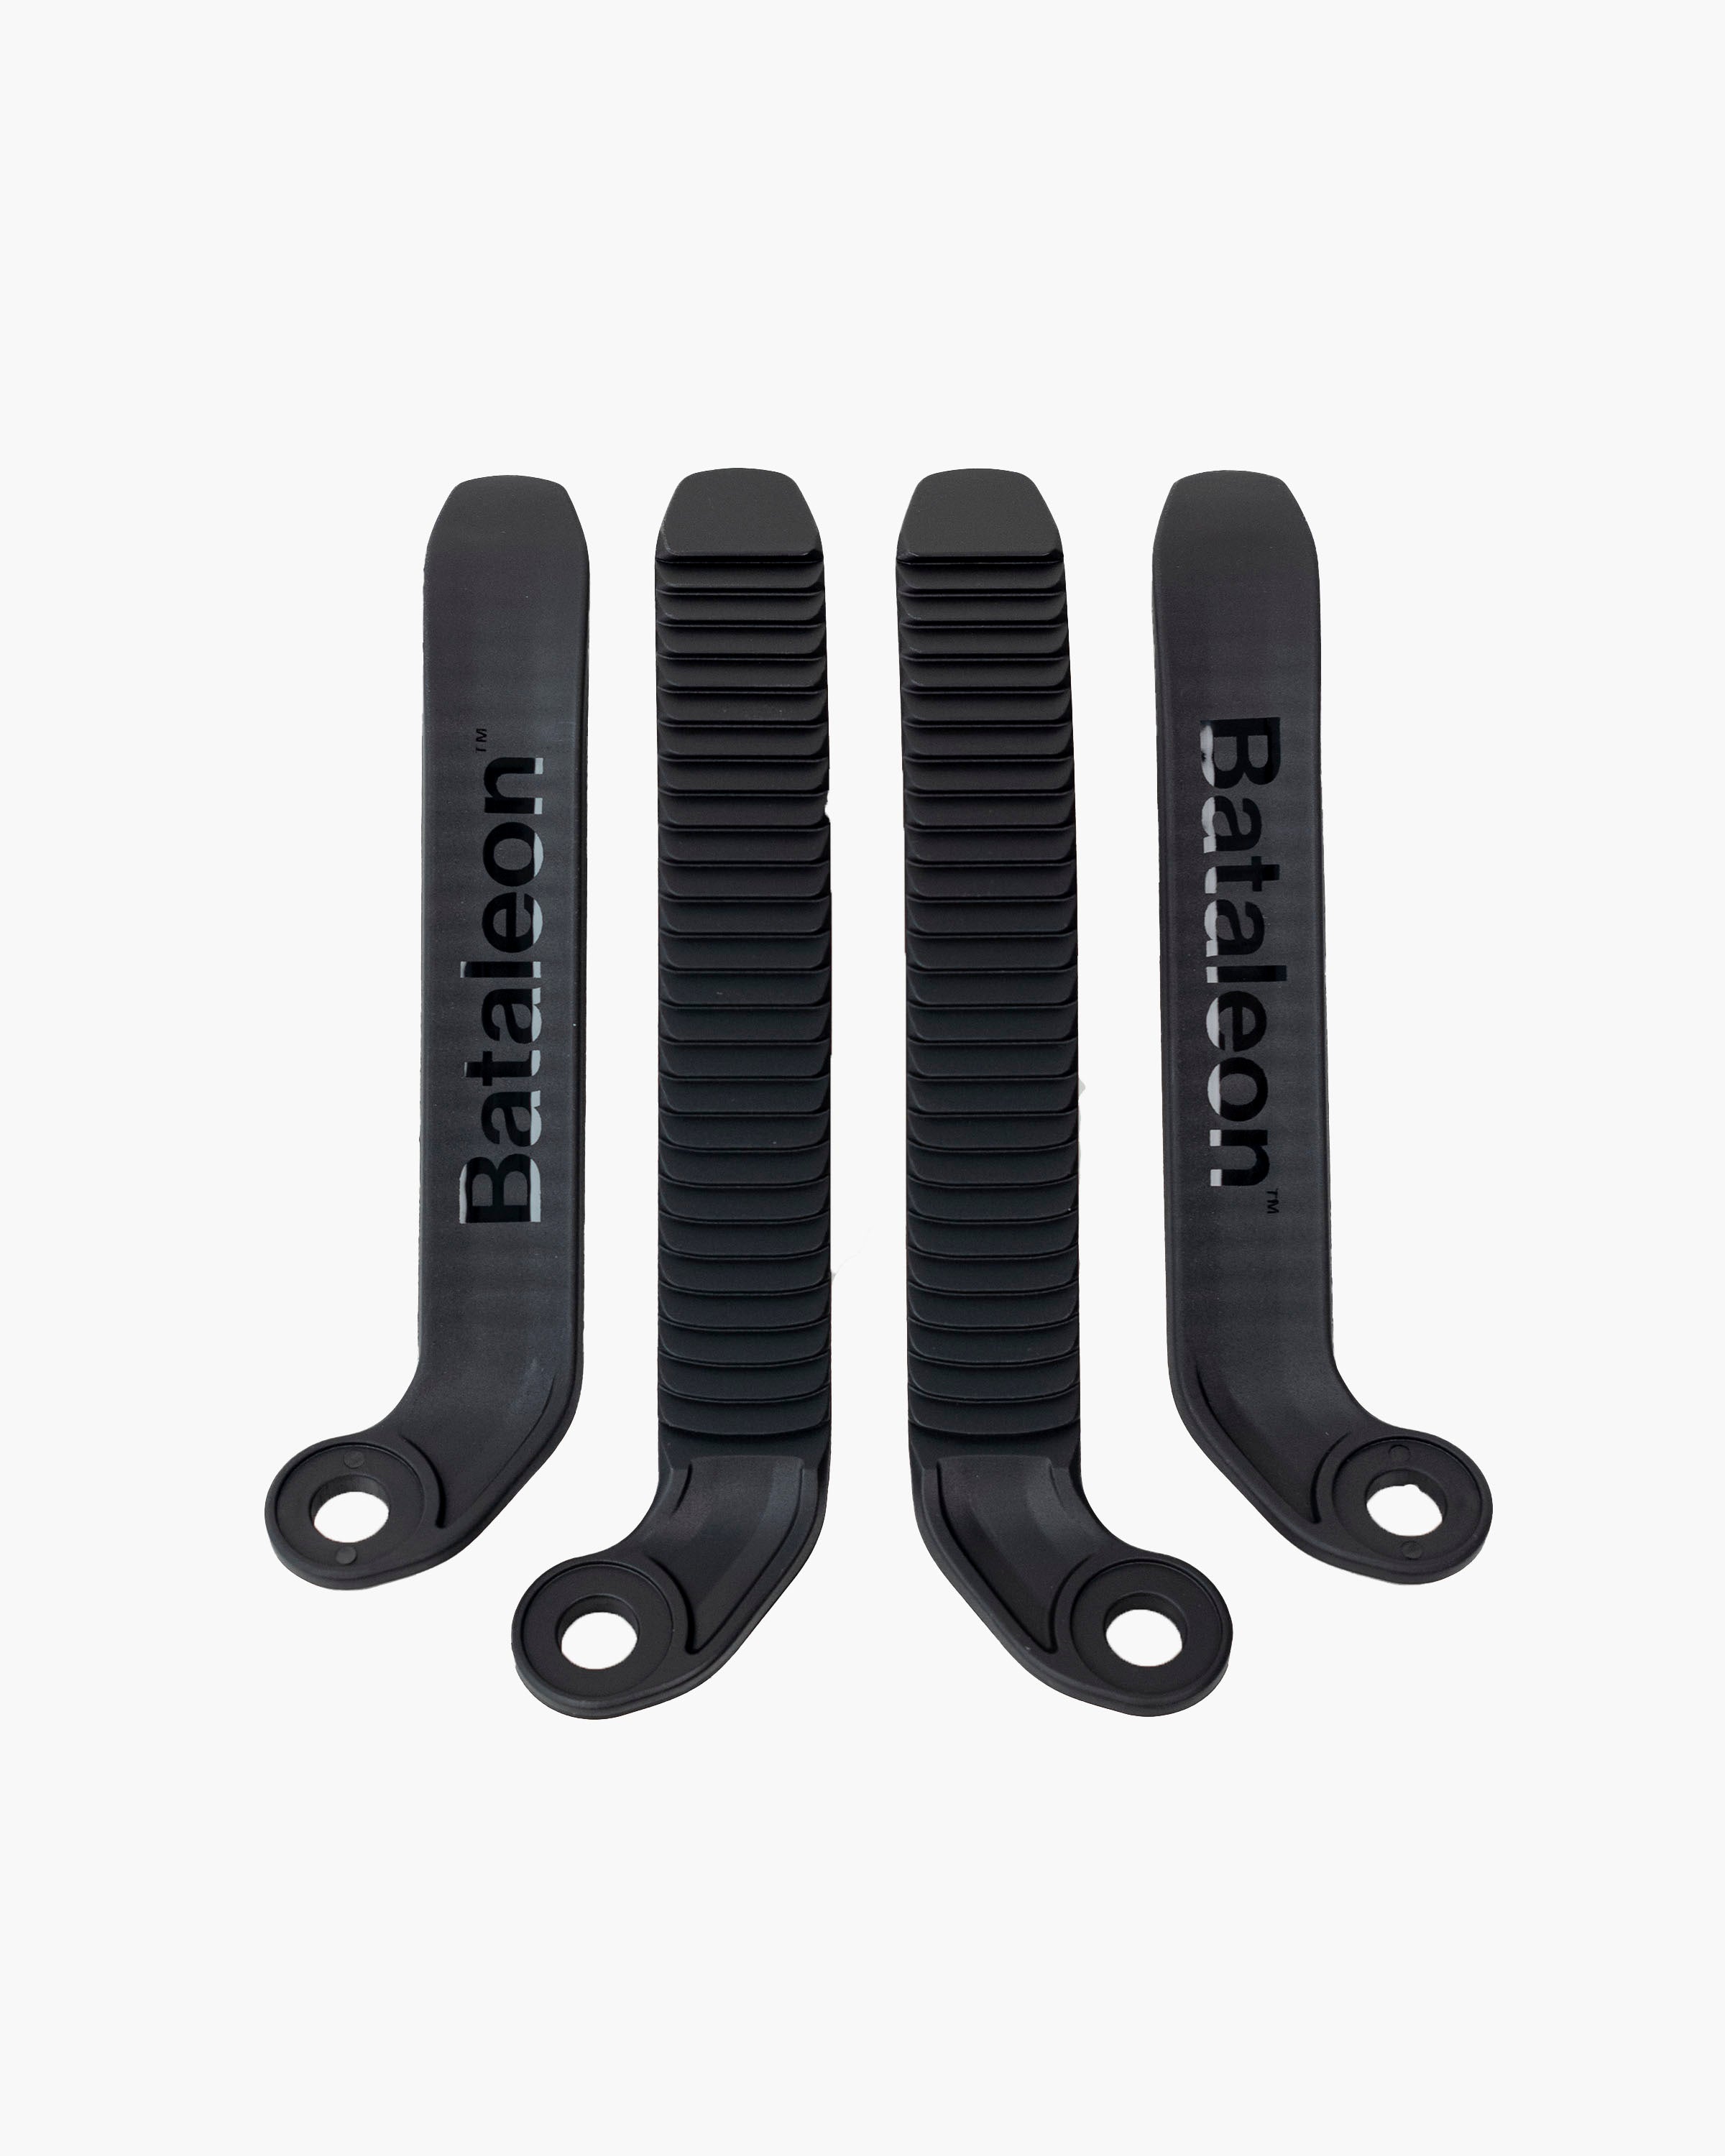 Now Snowboard Bindings - Toe Ladder Straps - Black - Spare Parts